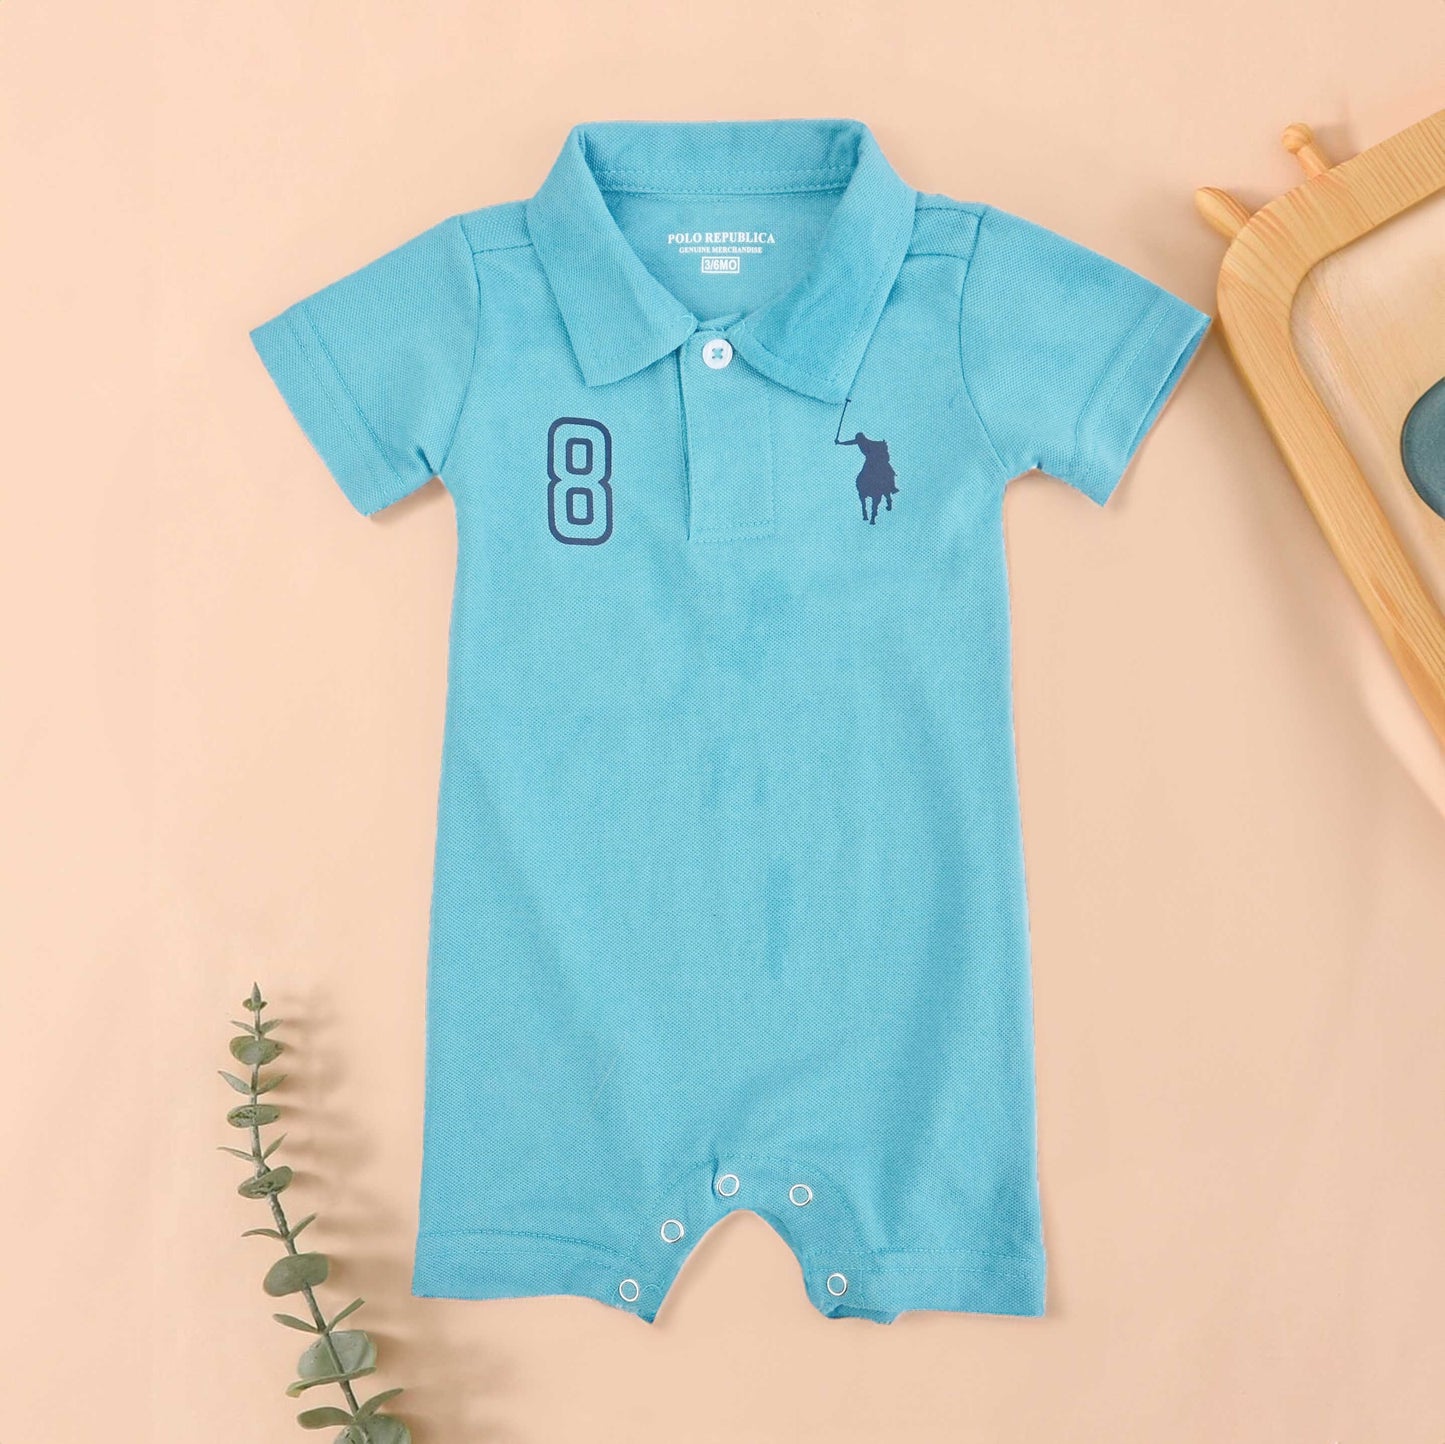 Polo Republica Signature Pony & 8 Printed Short Sleeve Baby Romper Romper Polo Republica Sky 0-3 Months 